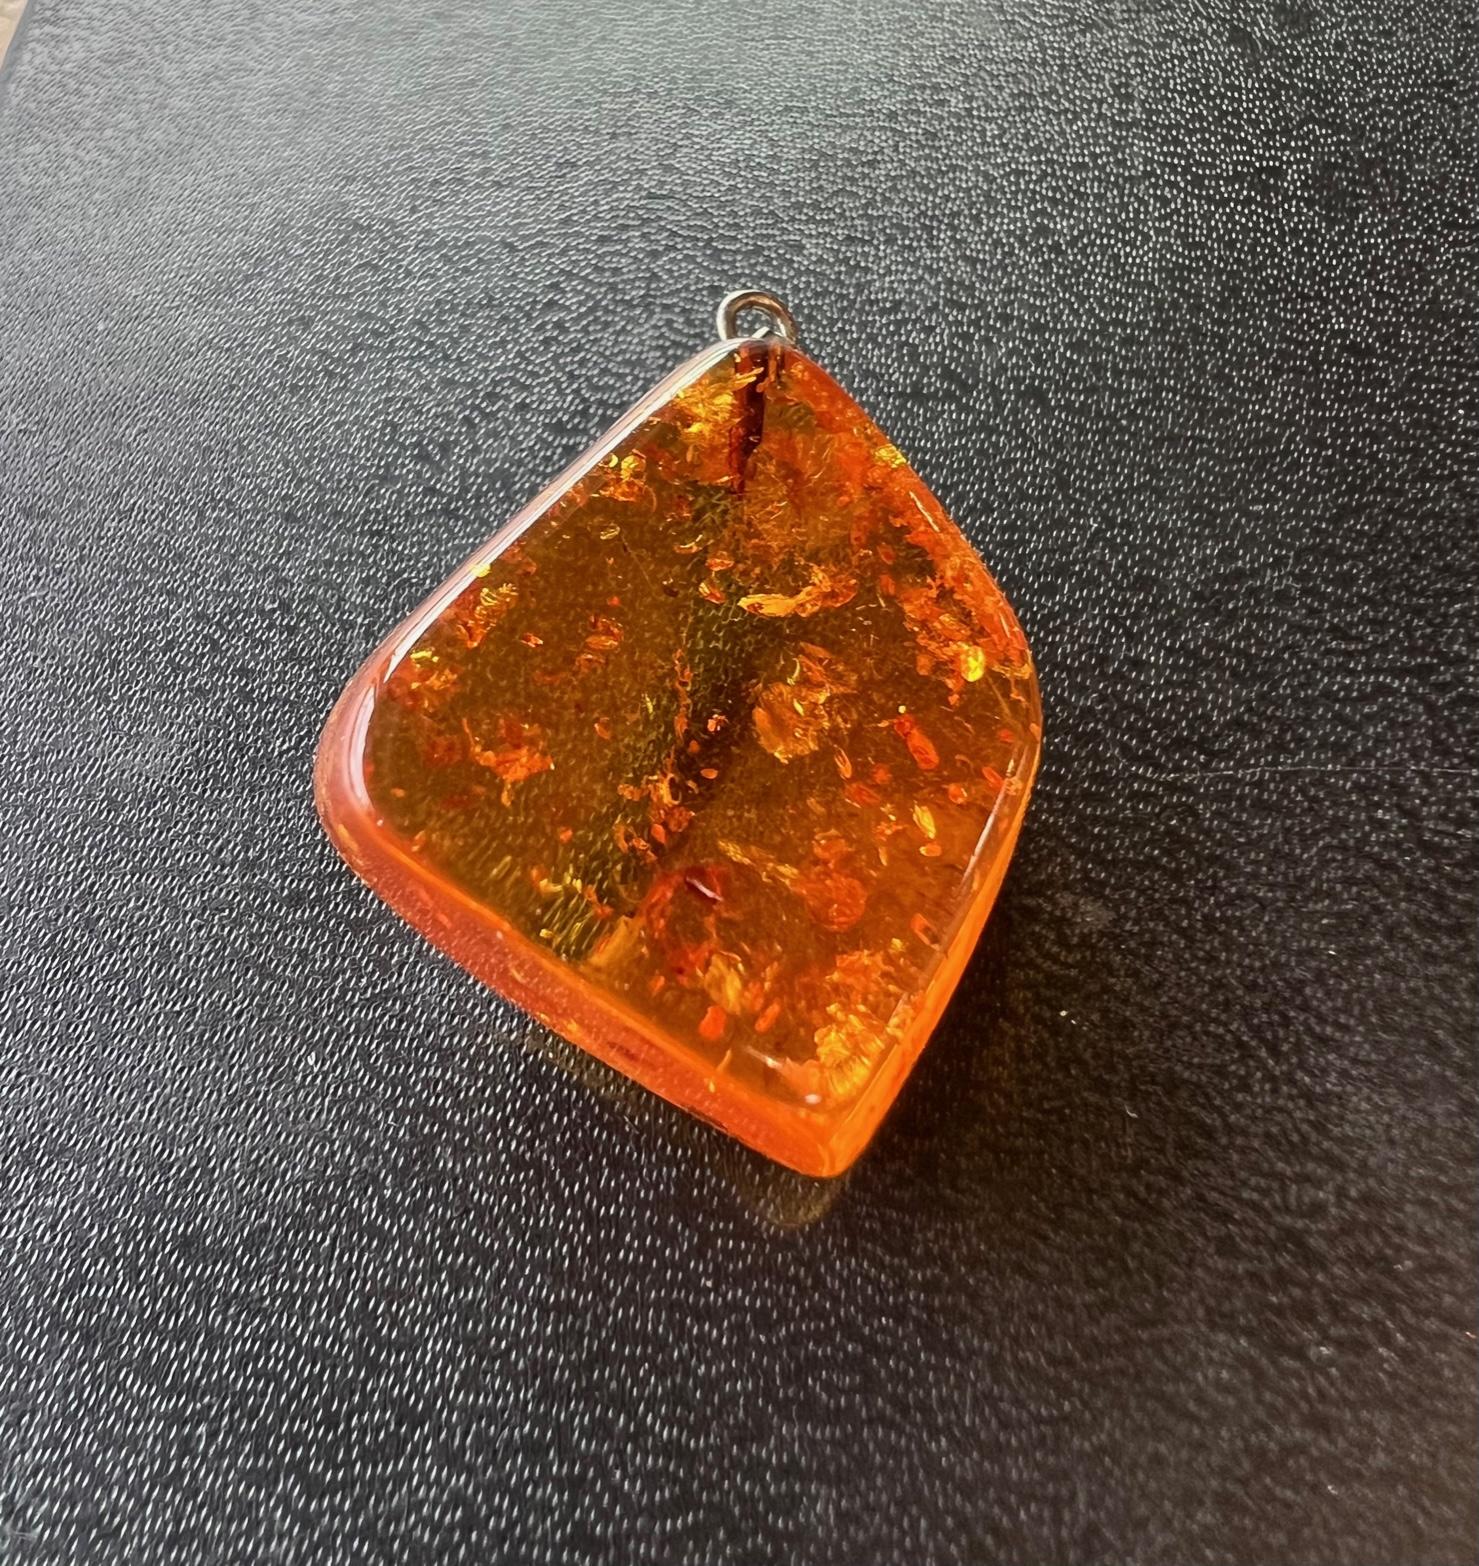 Baltic amber, also known as 